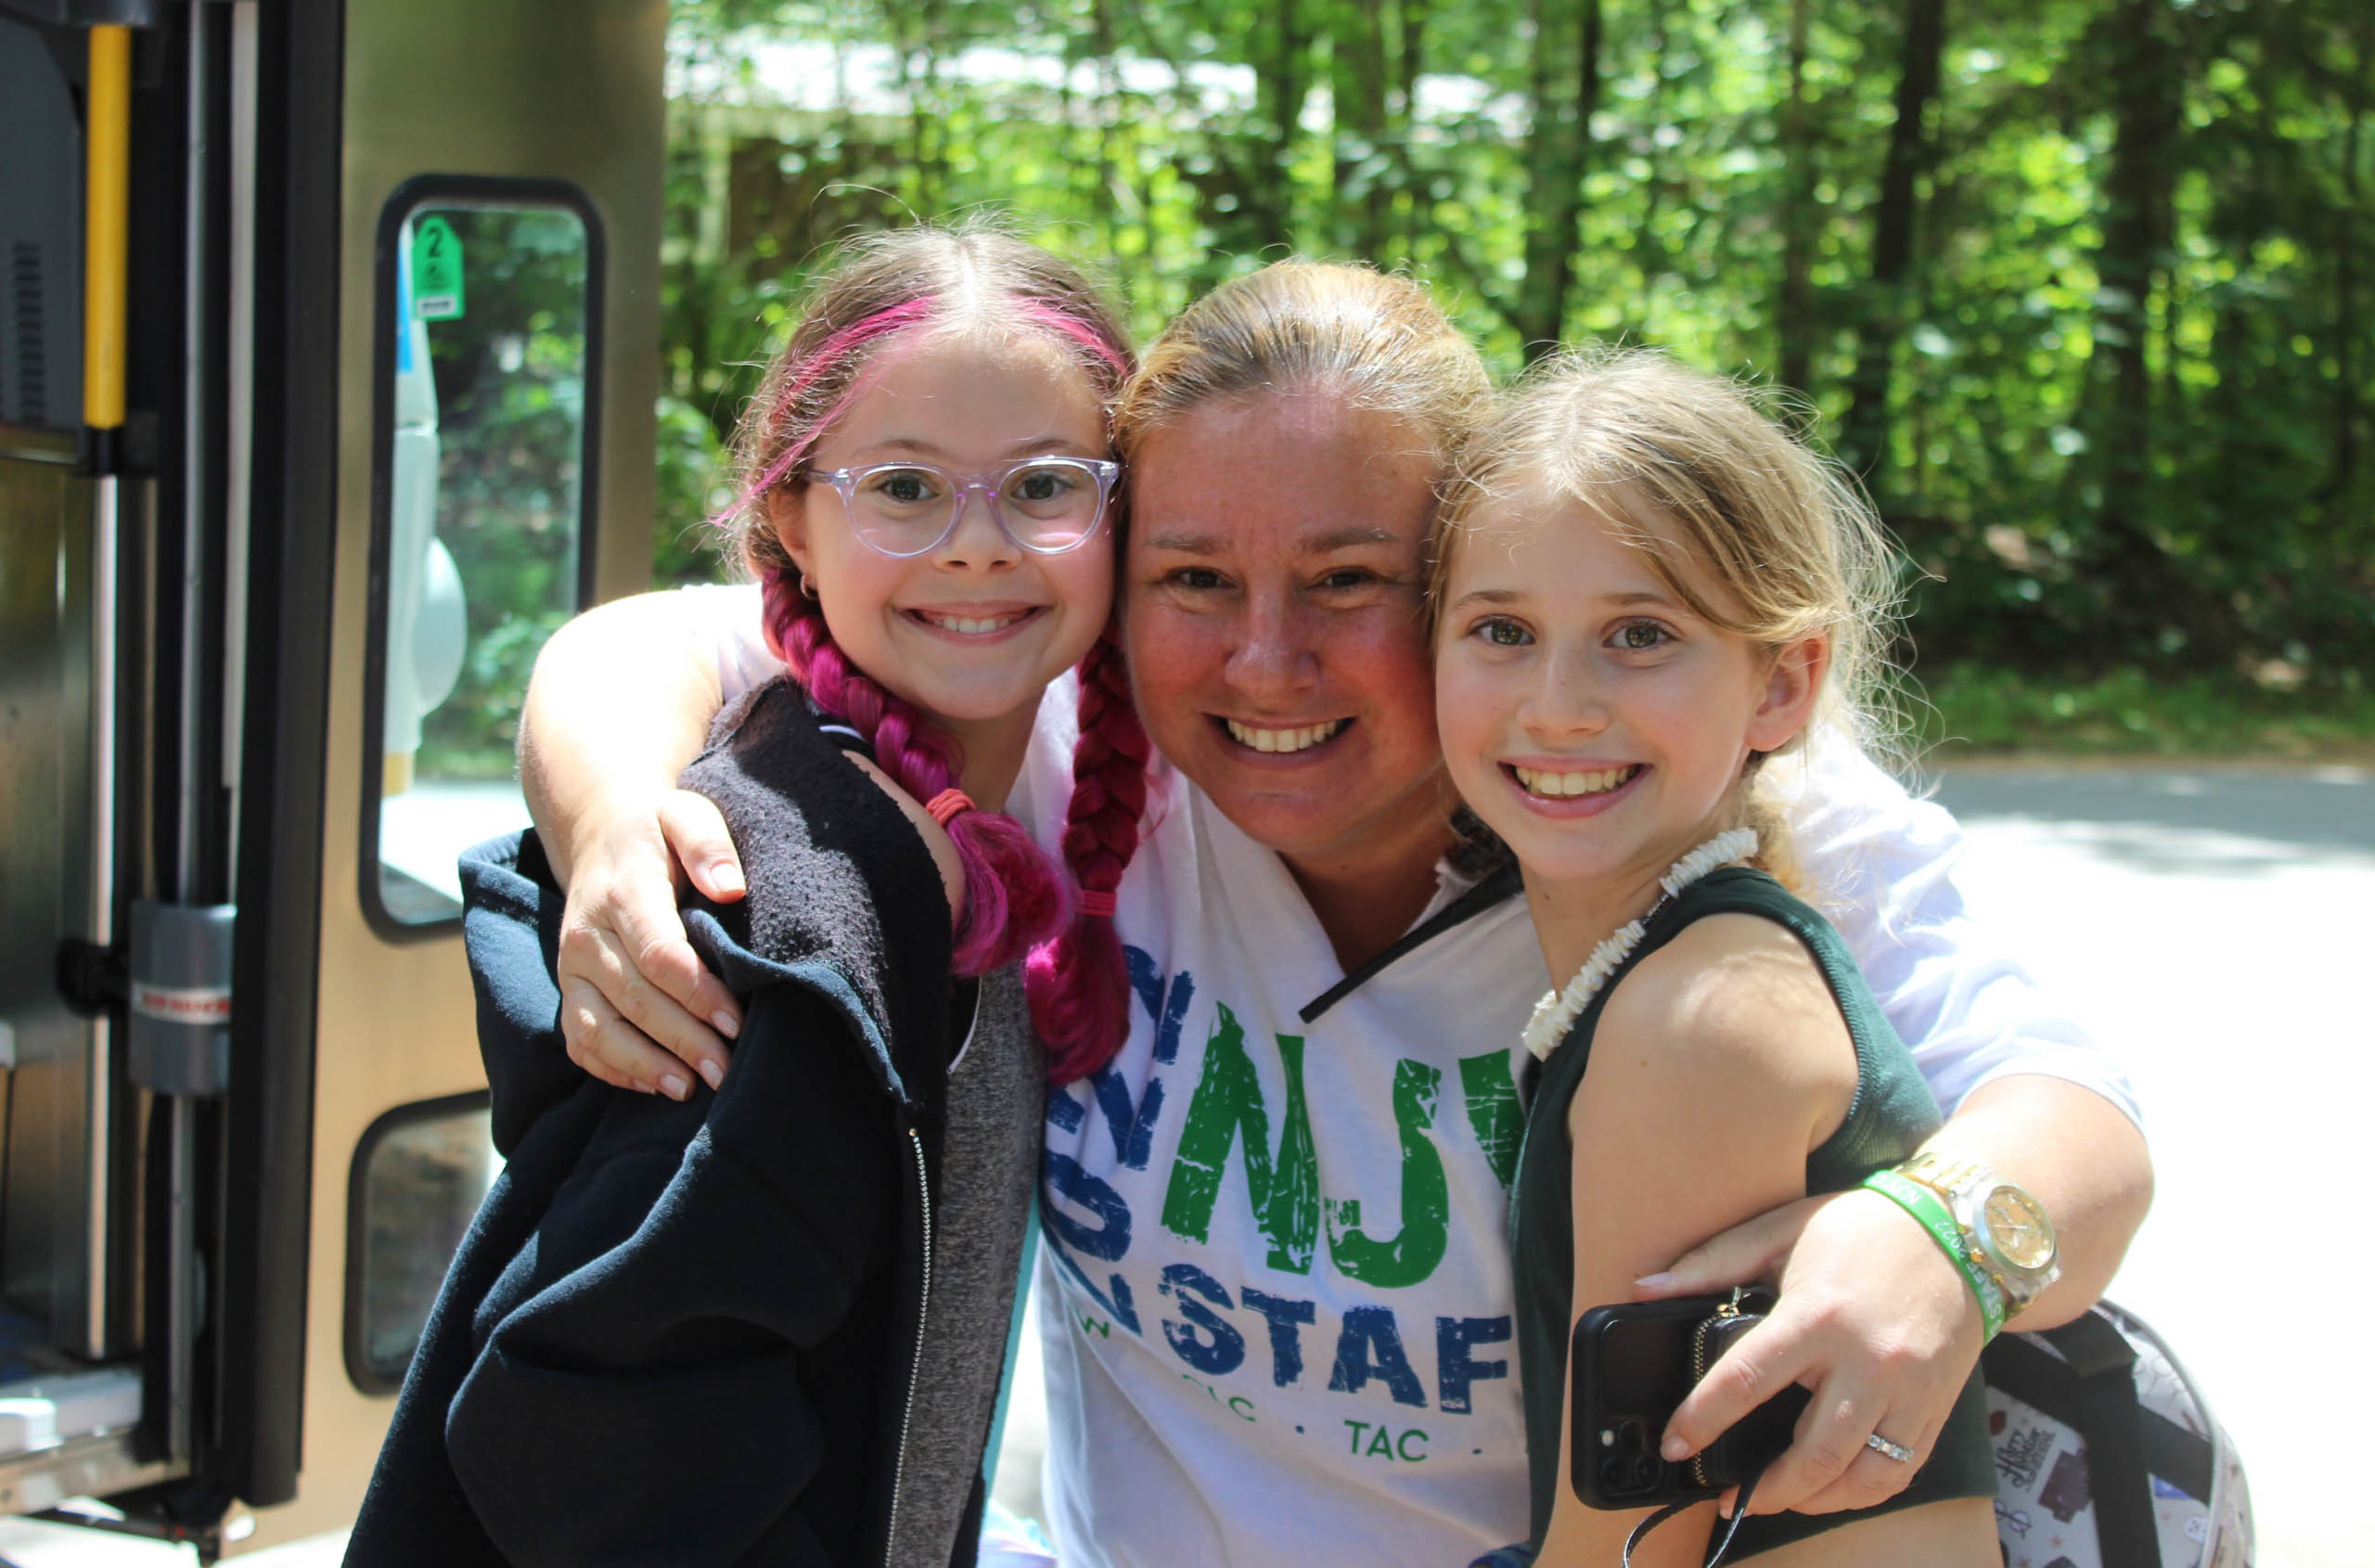 A staff member welcoming two campers.